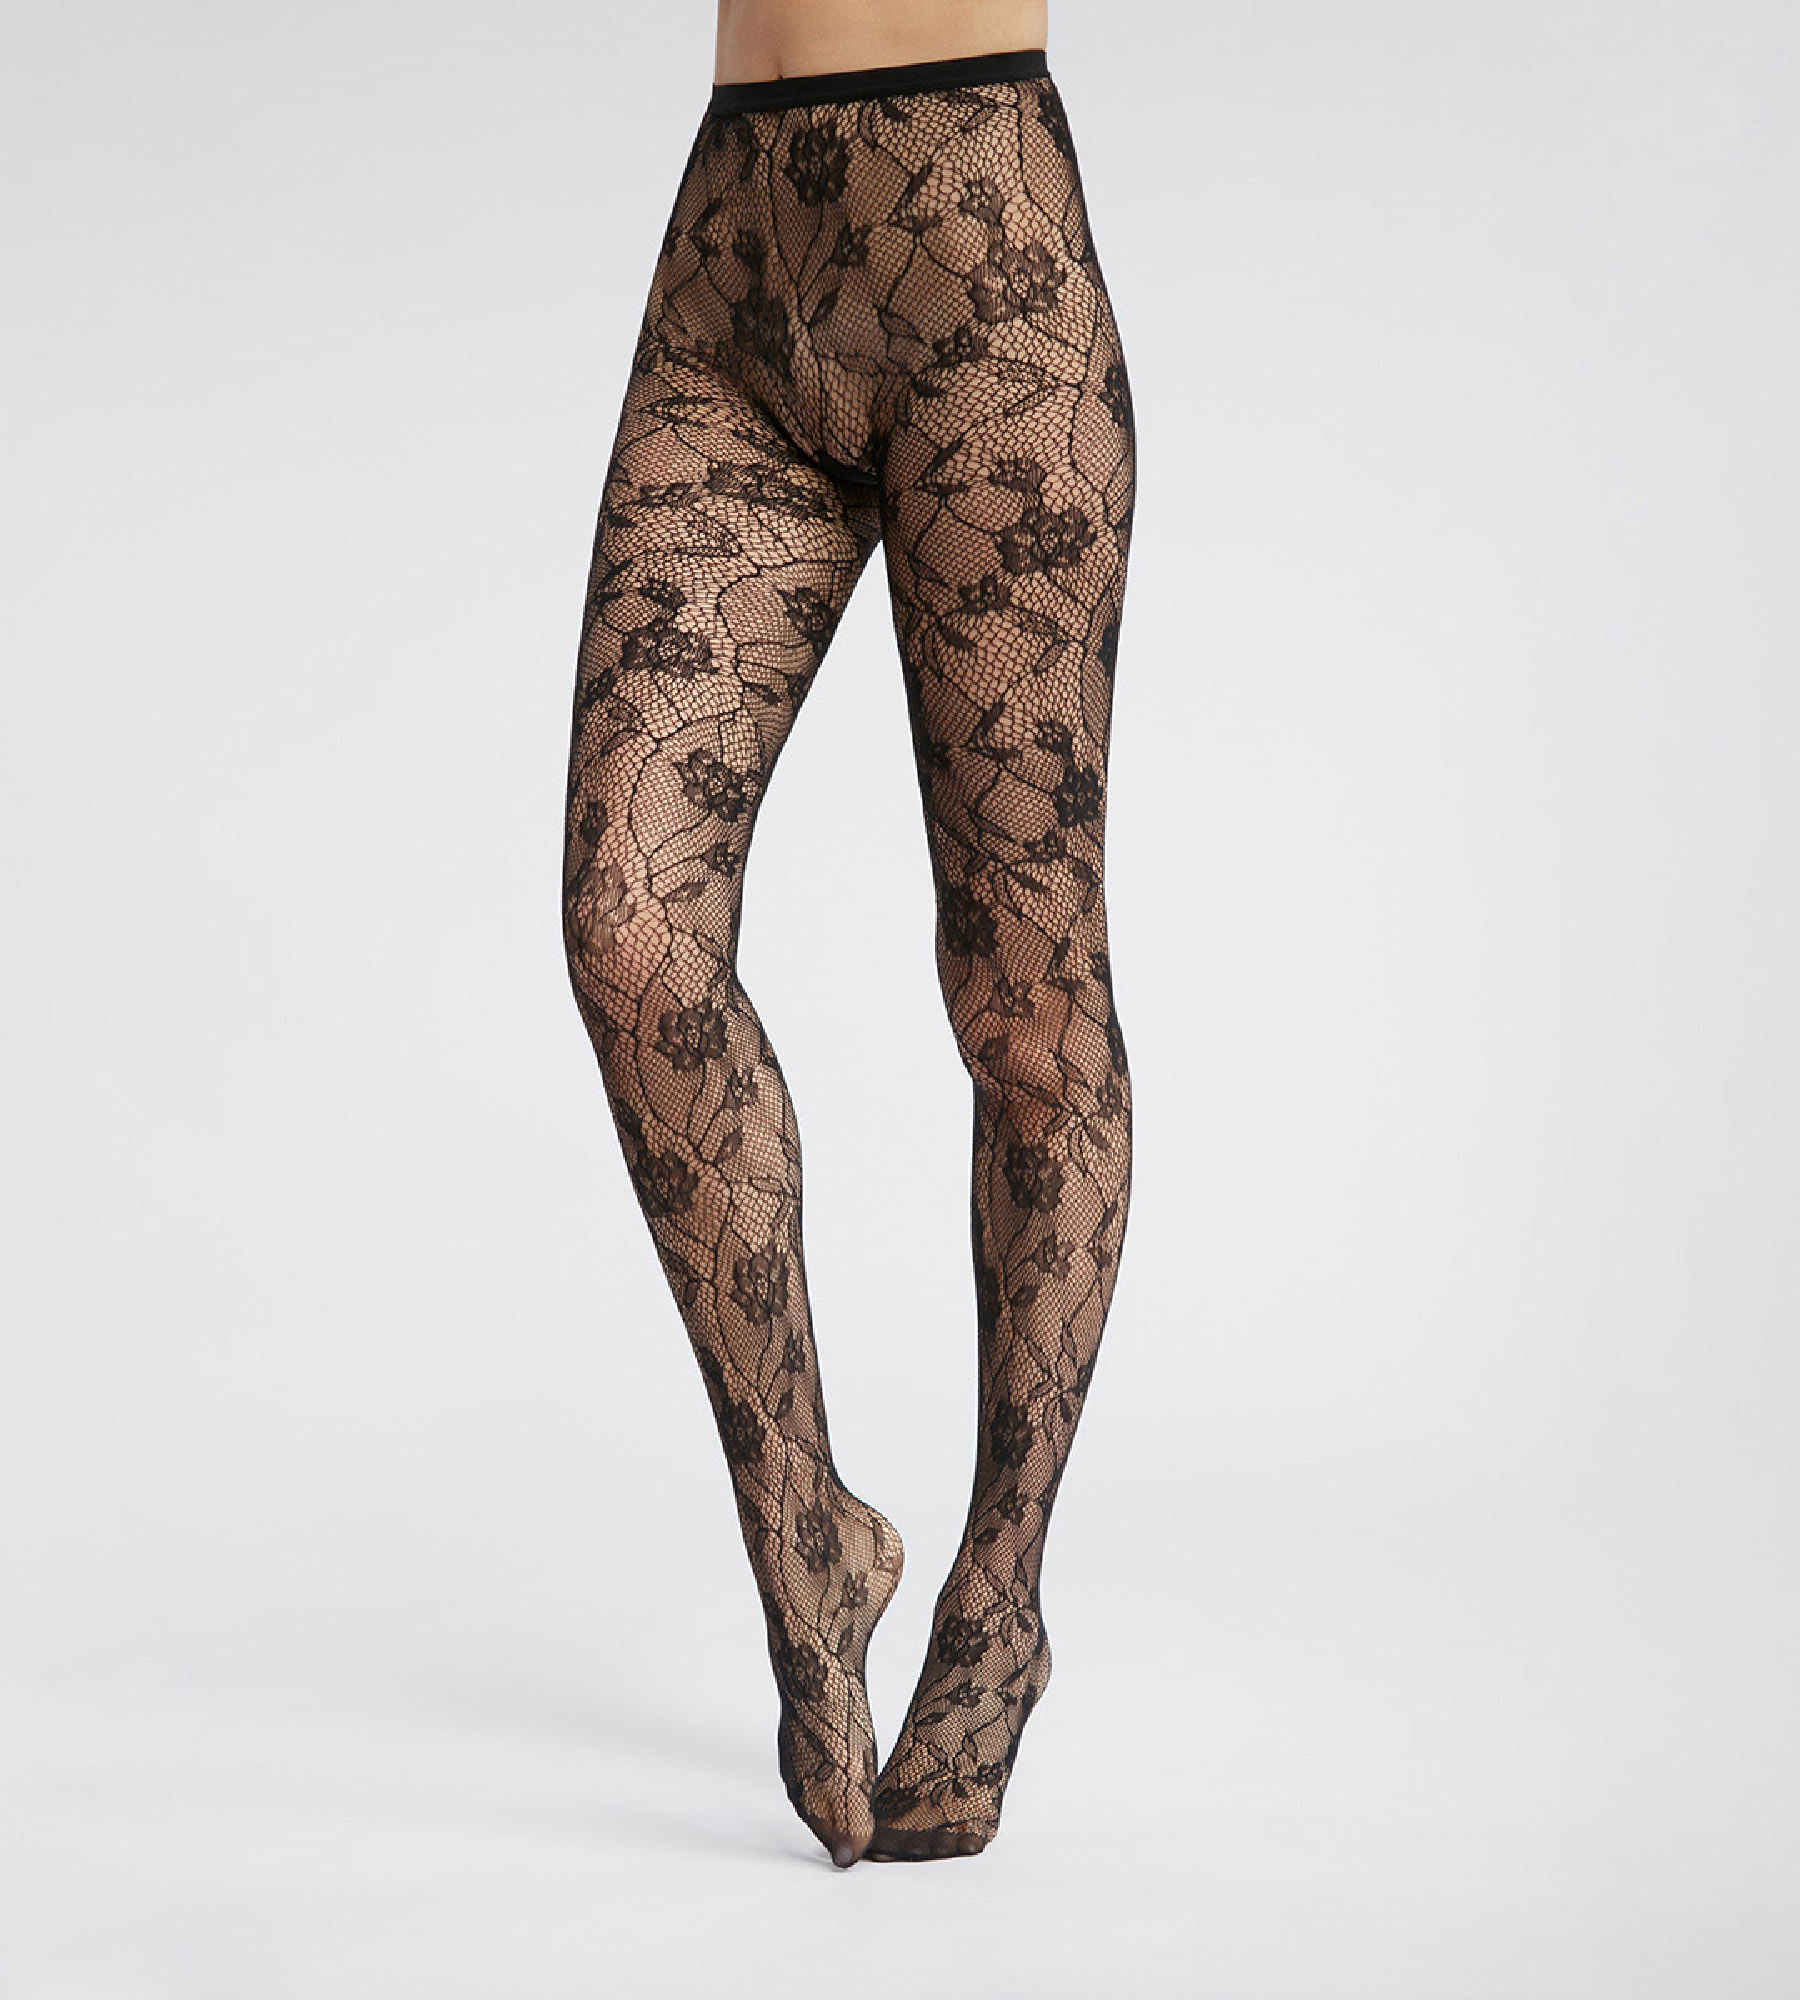 Floral Lace With Large Mesh Front & Small Holes Top - Tights at   Women's Clothing store: Pantyhose